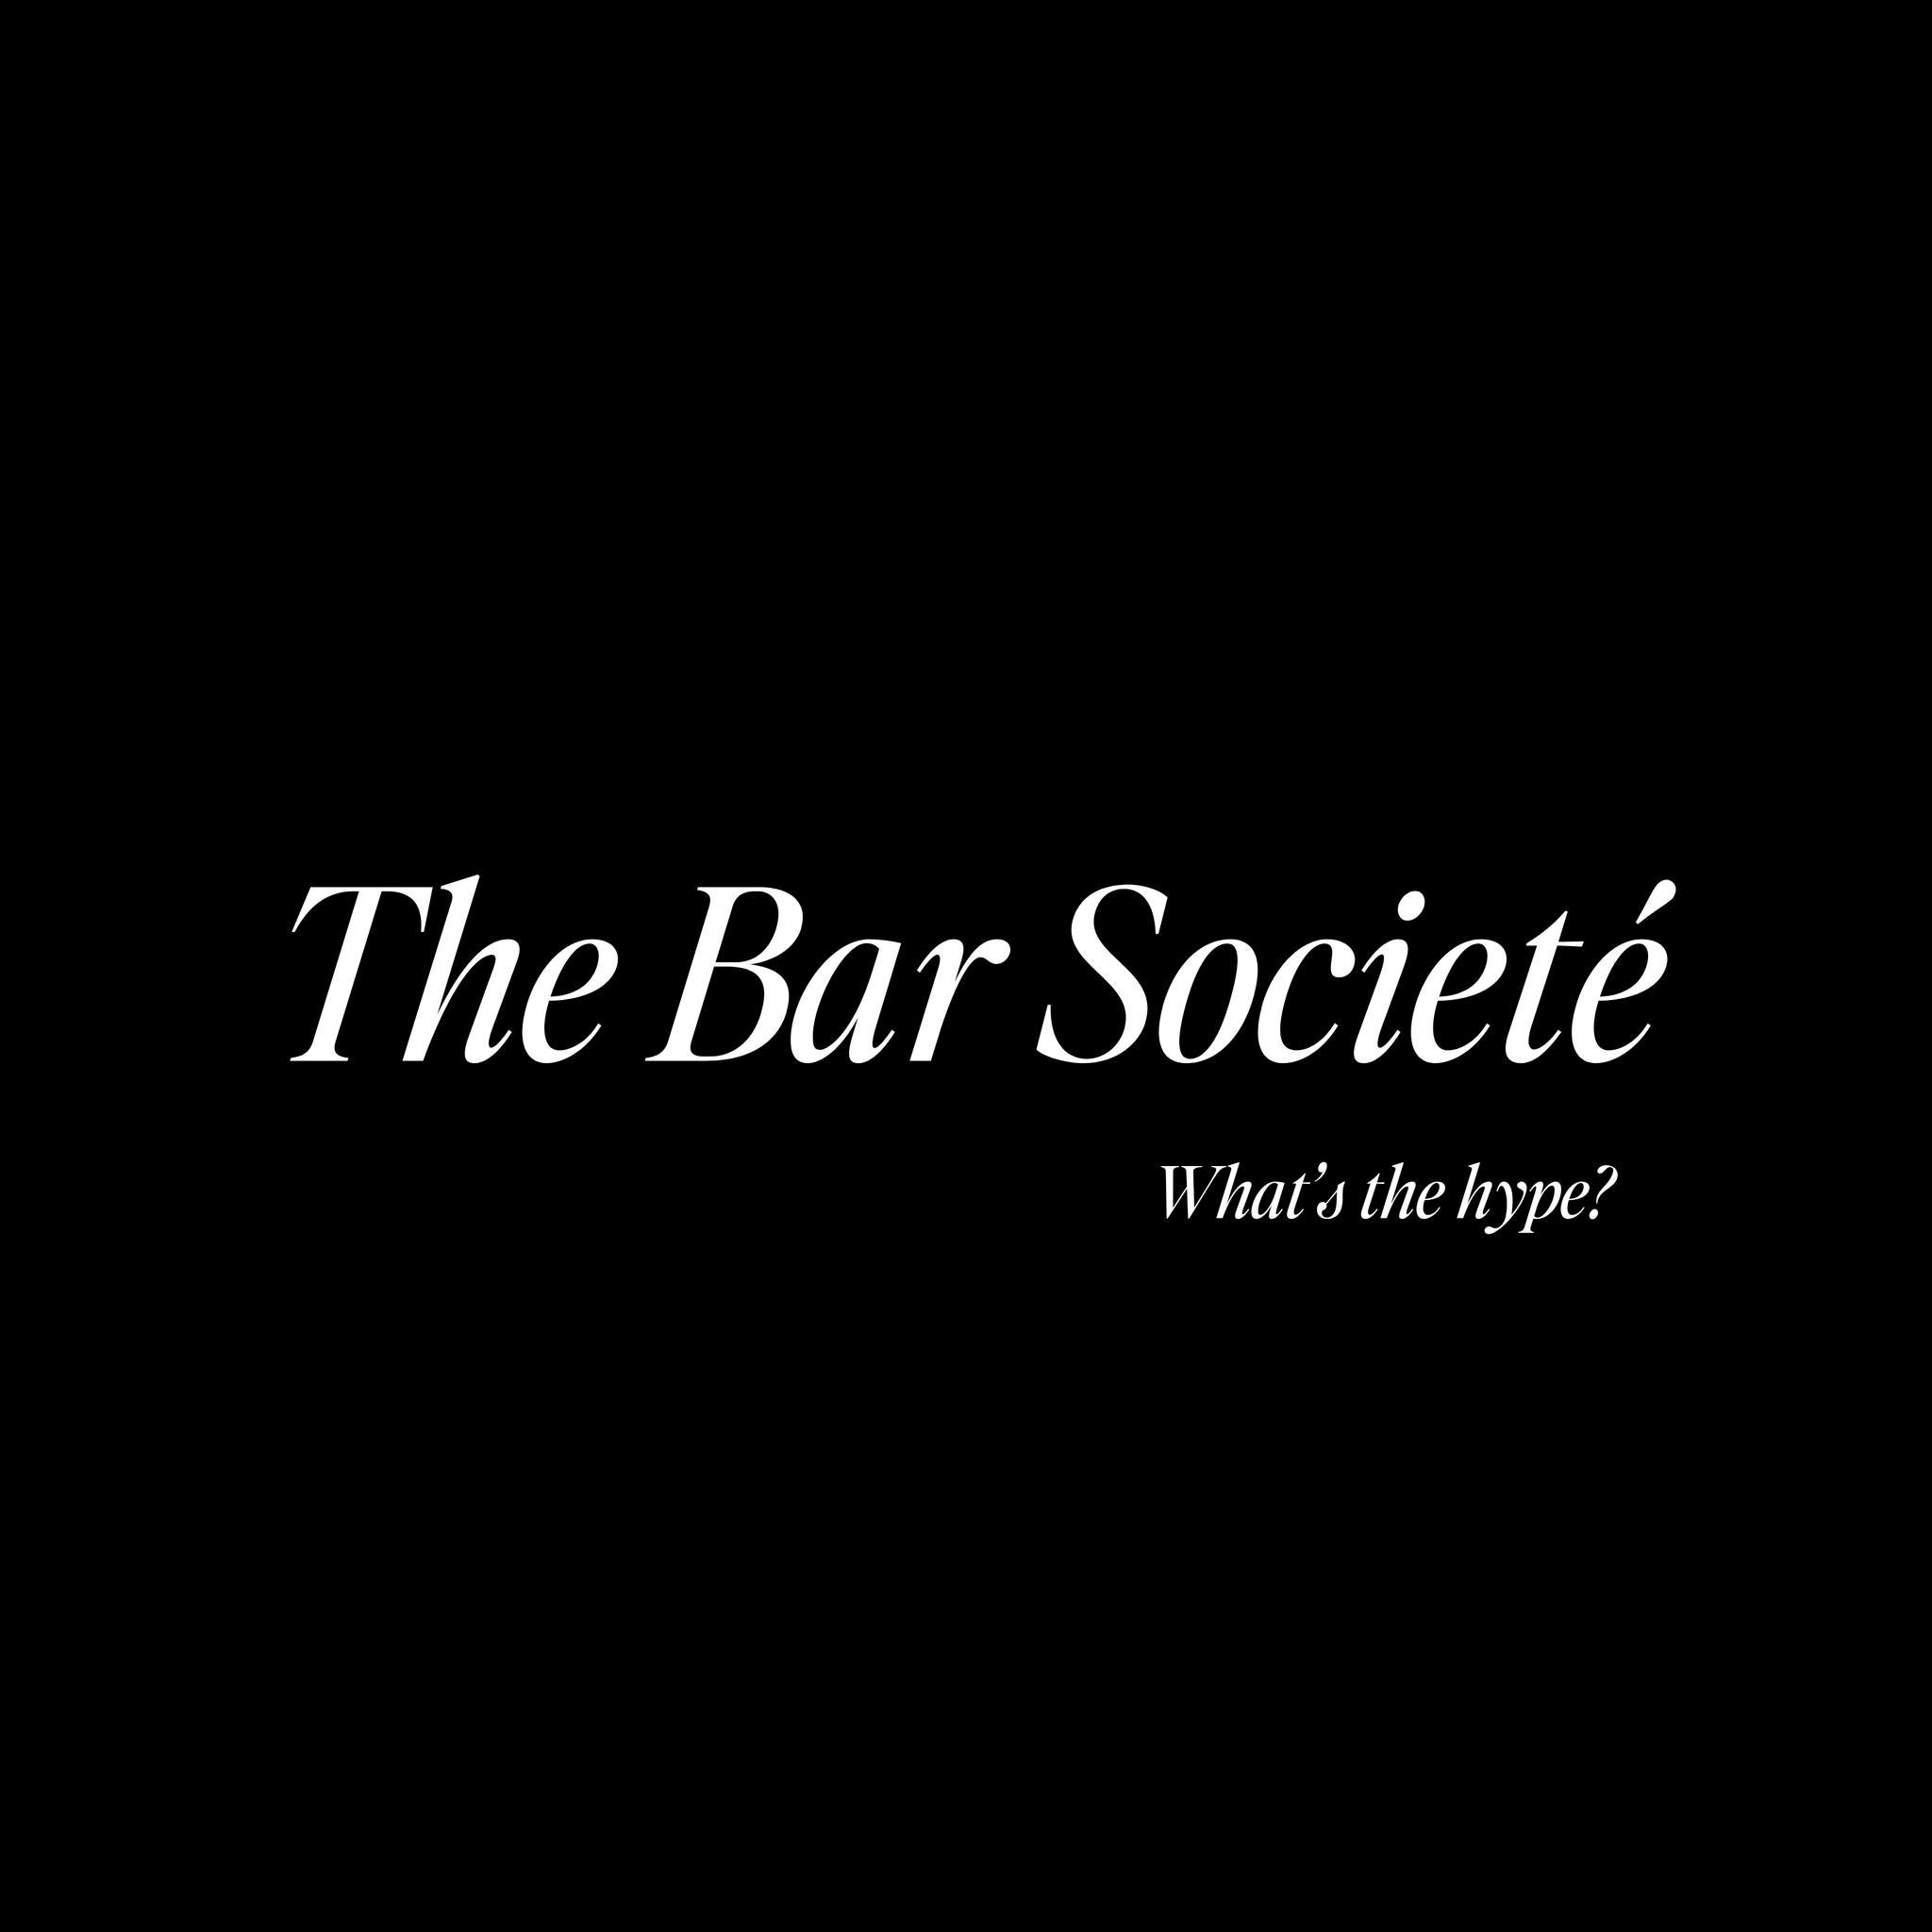 ....But really what is the hype? Elevating friendships, your business, personal growth and so much more. The Bar Societ&eacute; is an exclusive membership for women dedicated to raising the bar in every facet of their lives. A commitment to reaching 